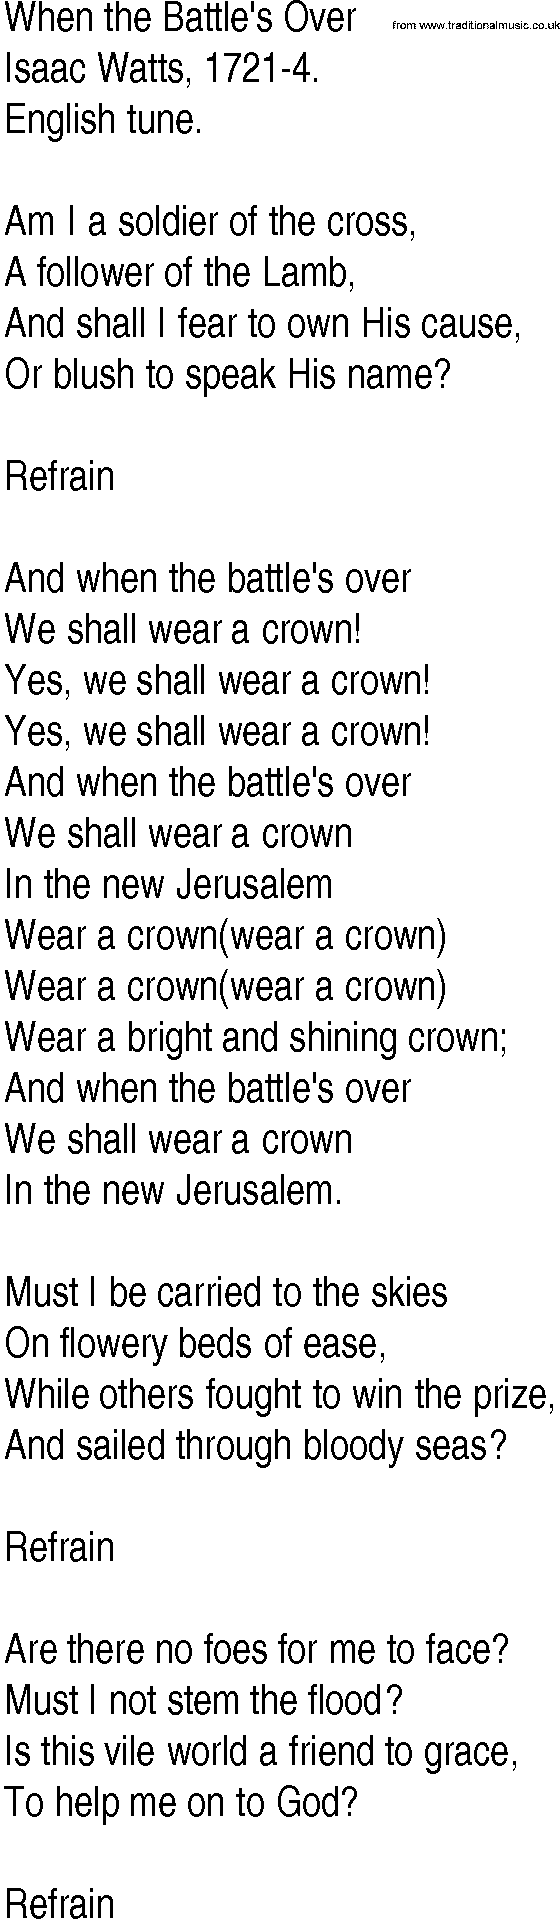 Hymn and Gospel Song: When the Battle's Over by Isaac Watts lyrics